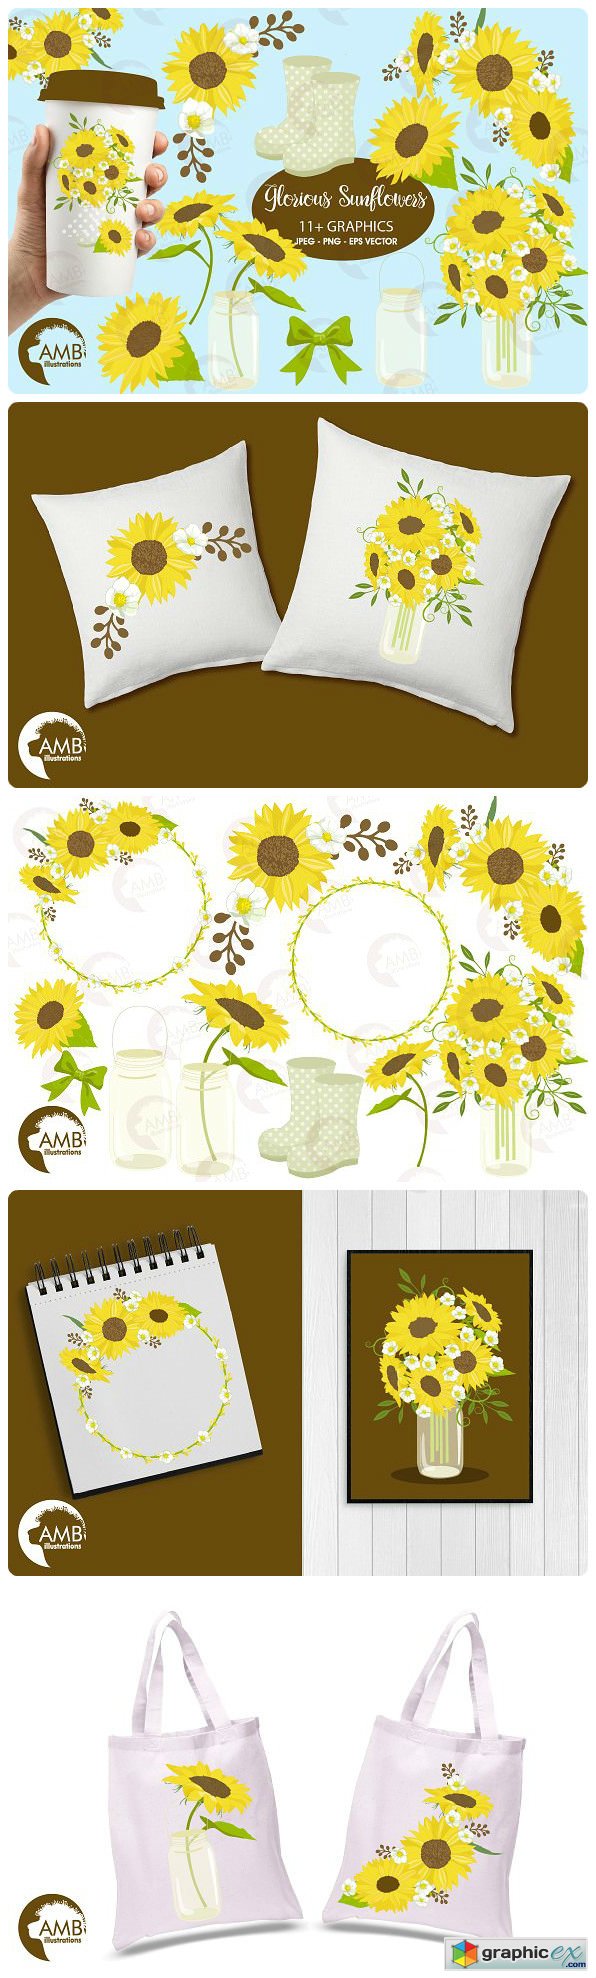 Glorious Sunflowers clipart AMB-1416